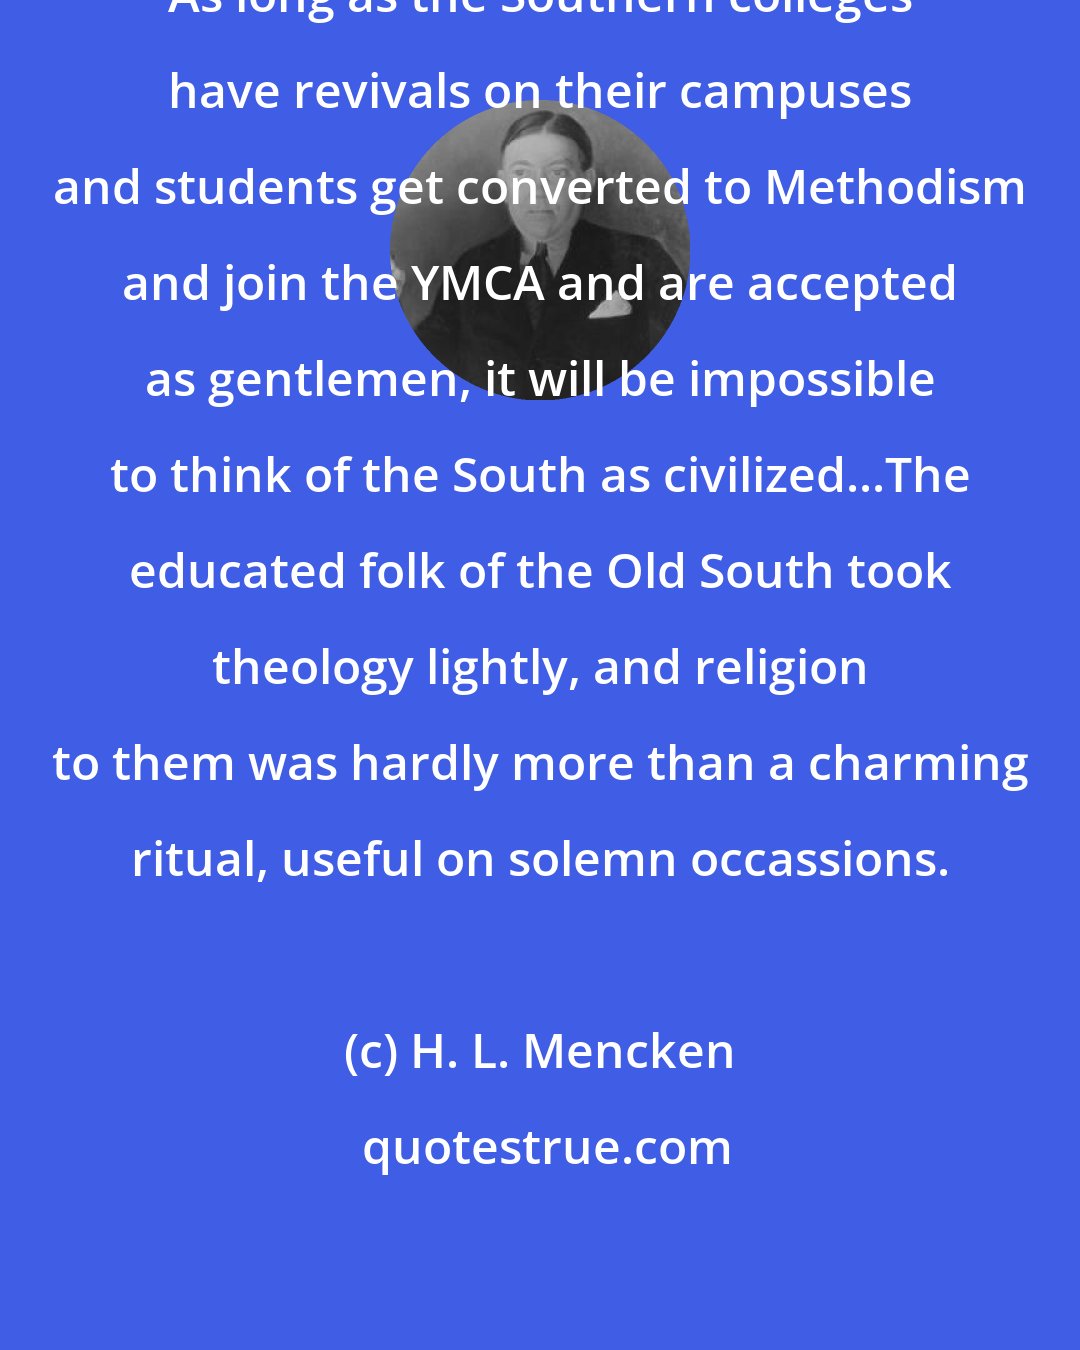 H. L. Mencken: As long as the Southern colleges have revivals on their campuses and students get converted to Methodism and join the YMCA and are accepted as gentlemen, it will be impossible to think of the South as civilized...The educated folk of the Old South took theology lightly, and religion to them was hardly more than a charming ritual, useful on solemn occassions.